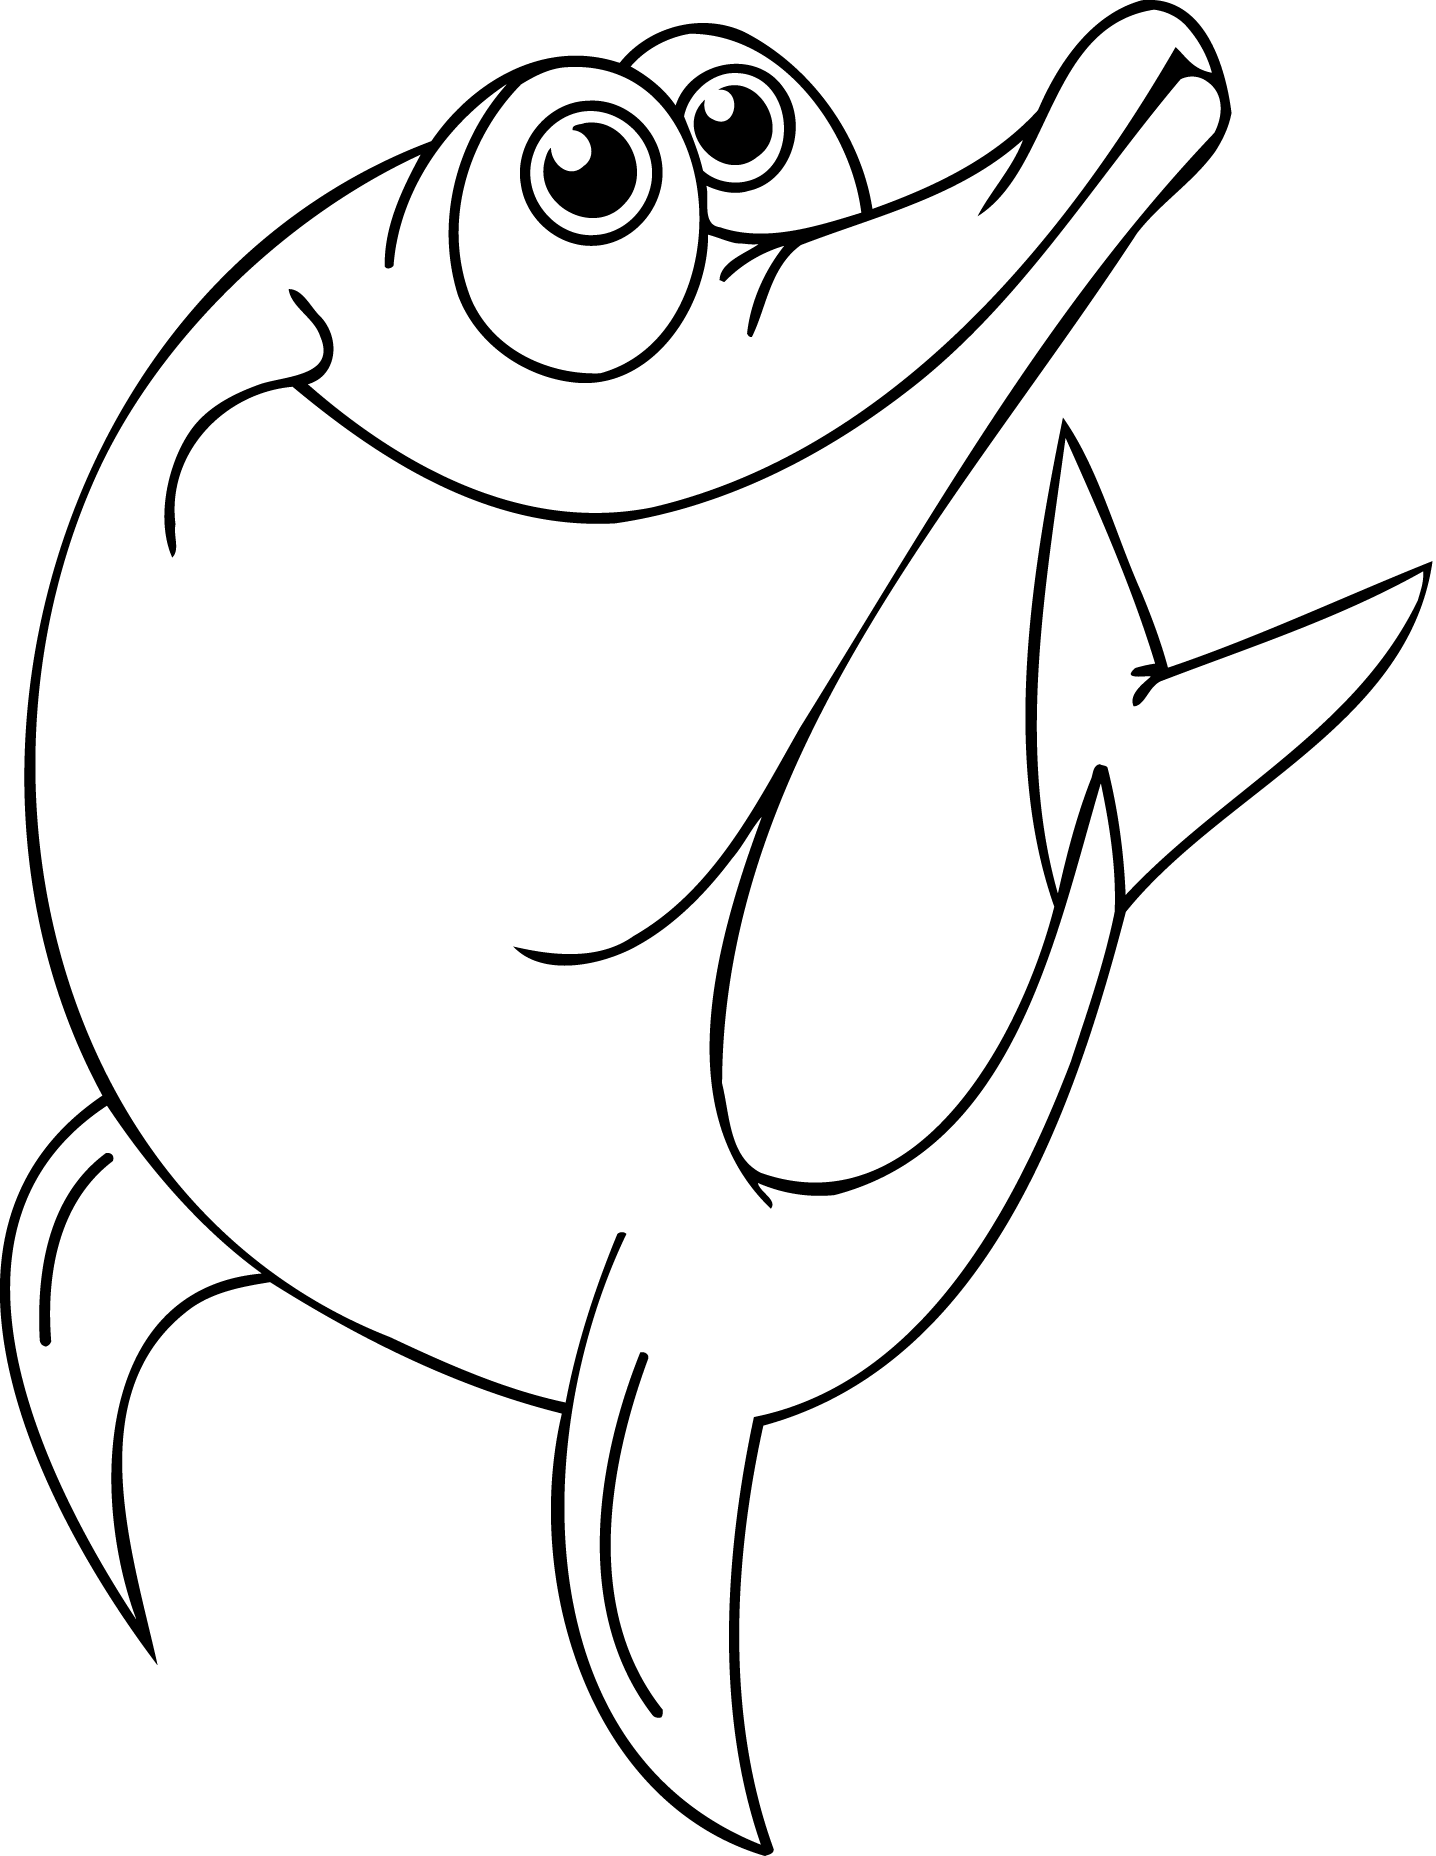 Dolphin Coloring Pages (20) - Coloring Kids